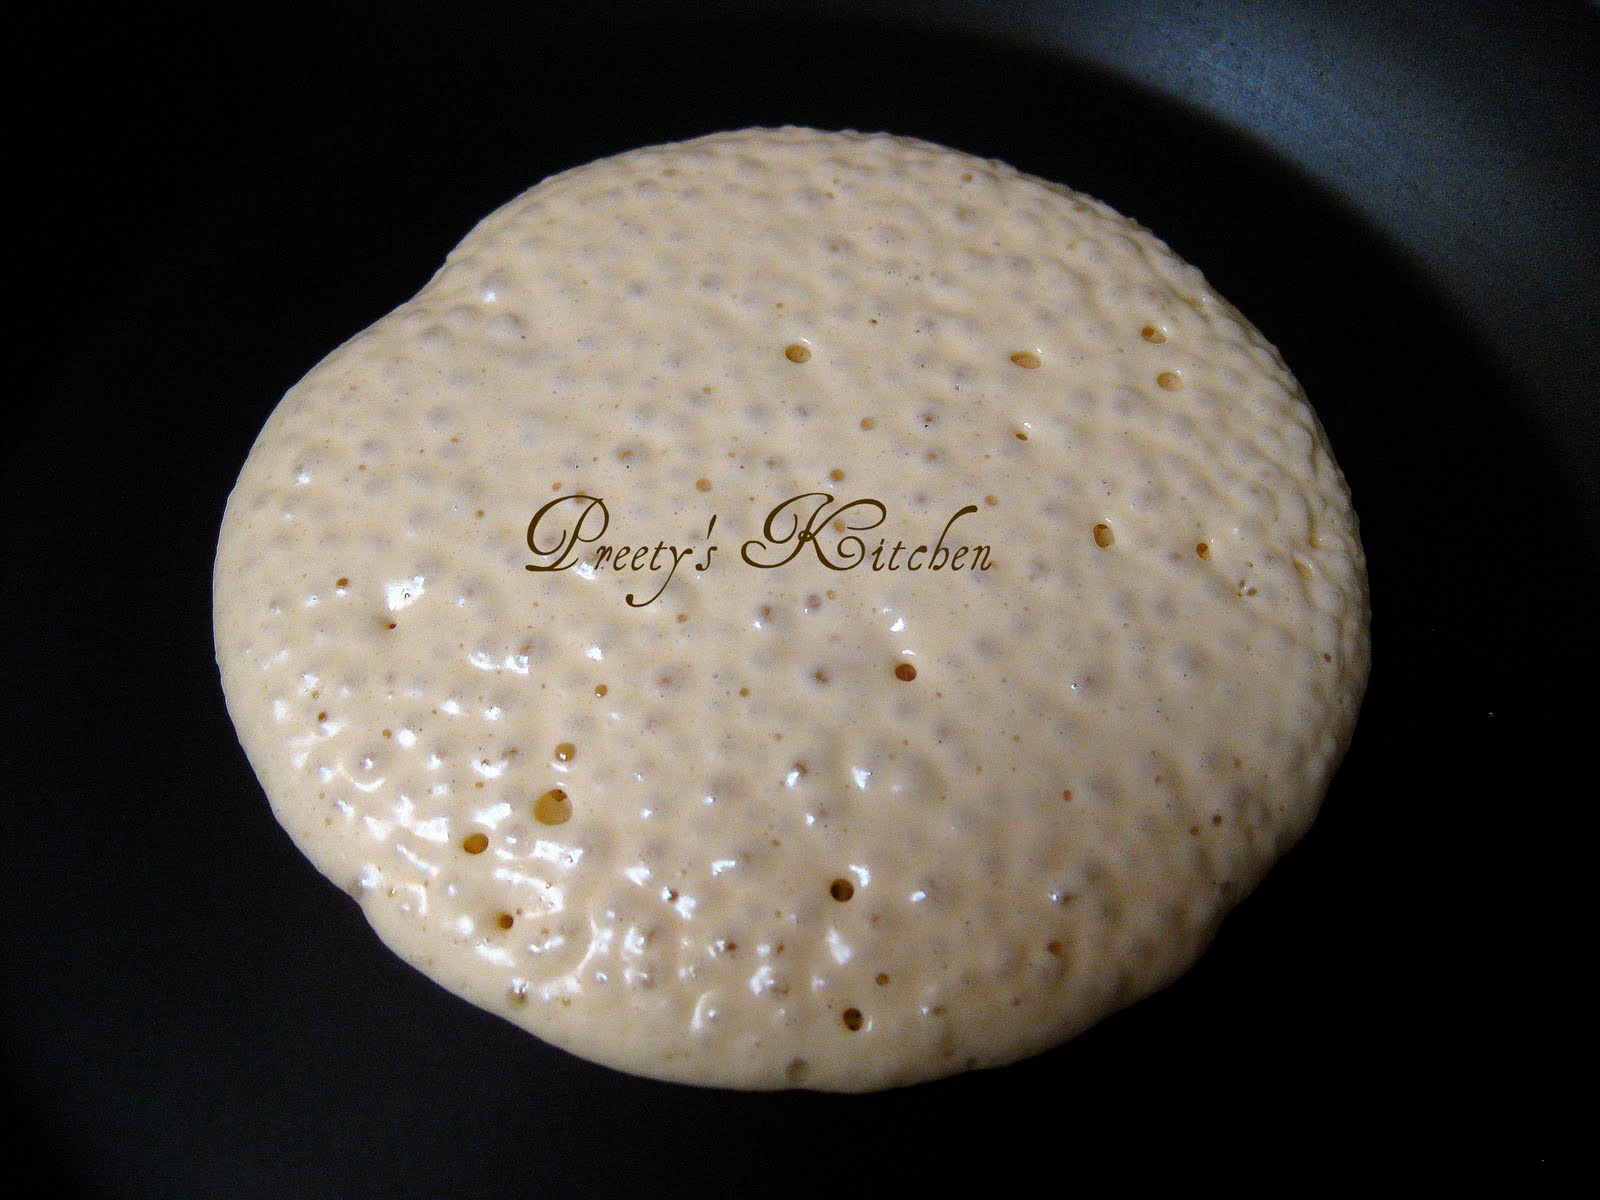 batter to make how Pancake all Preety's  flour Kitchen: pancake Recipe purpose with Simple